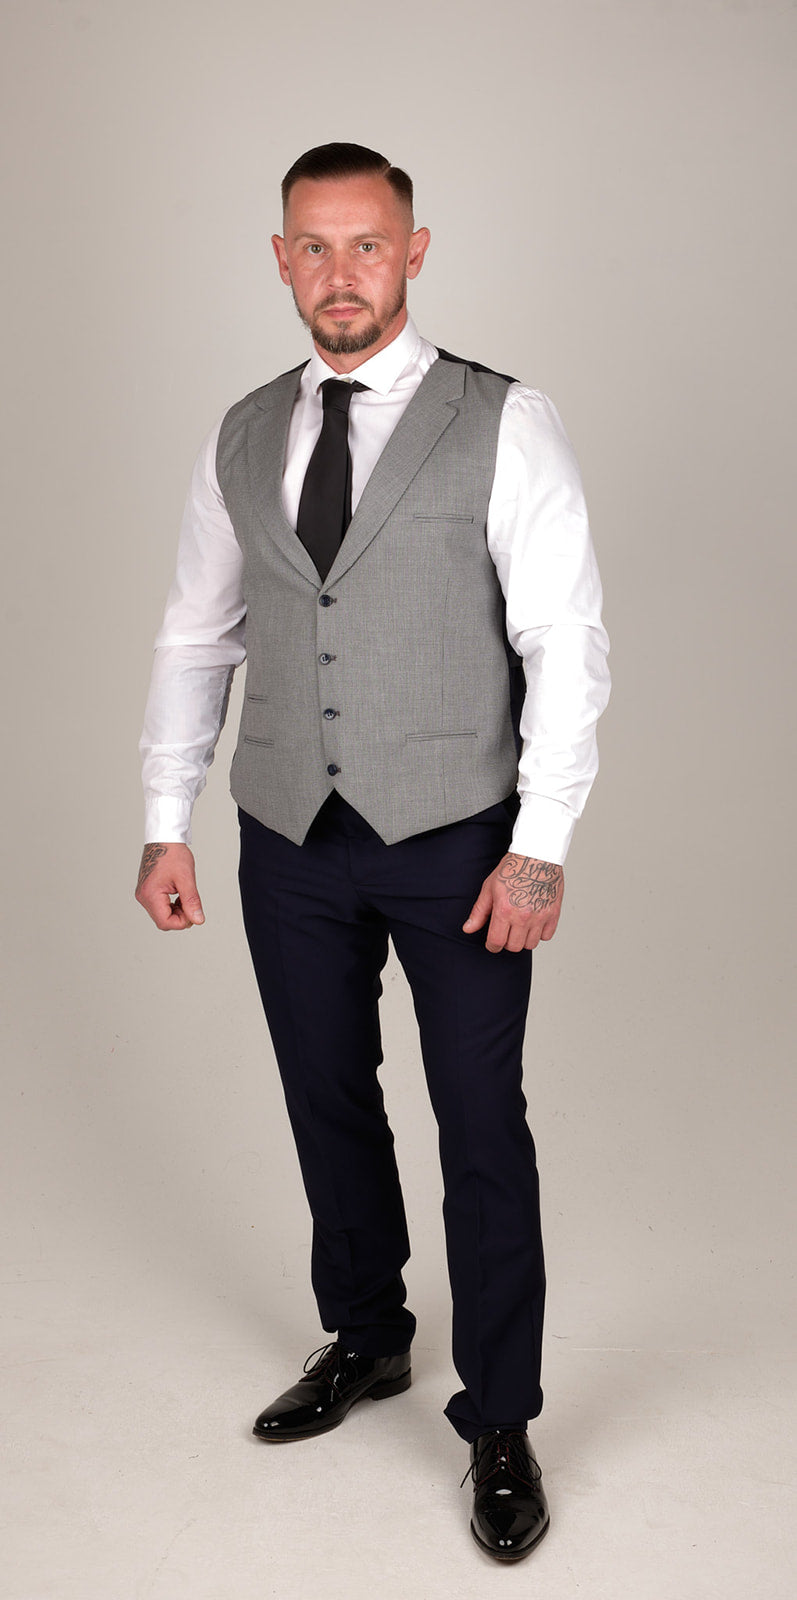 • Mens 3 Piece Herringbone Tweed Suit WIth Contrasting Grey Waistcoat • This Suit Comes Complete With Waistcoat, Trousers & Blazer Jacket! • Classic 1920s Tailoring From The Era Of Gatsby & Tailored For The Modern Man, Perfect Suit To Be Worn For Any Smart Formal Occasion Such As Weddings, Proms, Parties or Work • Made From Premium Herringbone Tweed Textured Polyester Fabric With Textured Detailing, Tailored Fit (in between slim & regular fit), True To Size | Office Wear